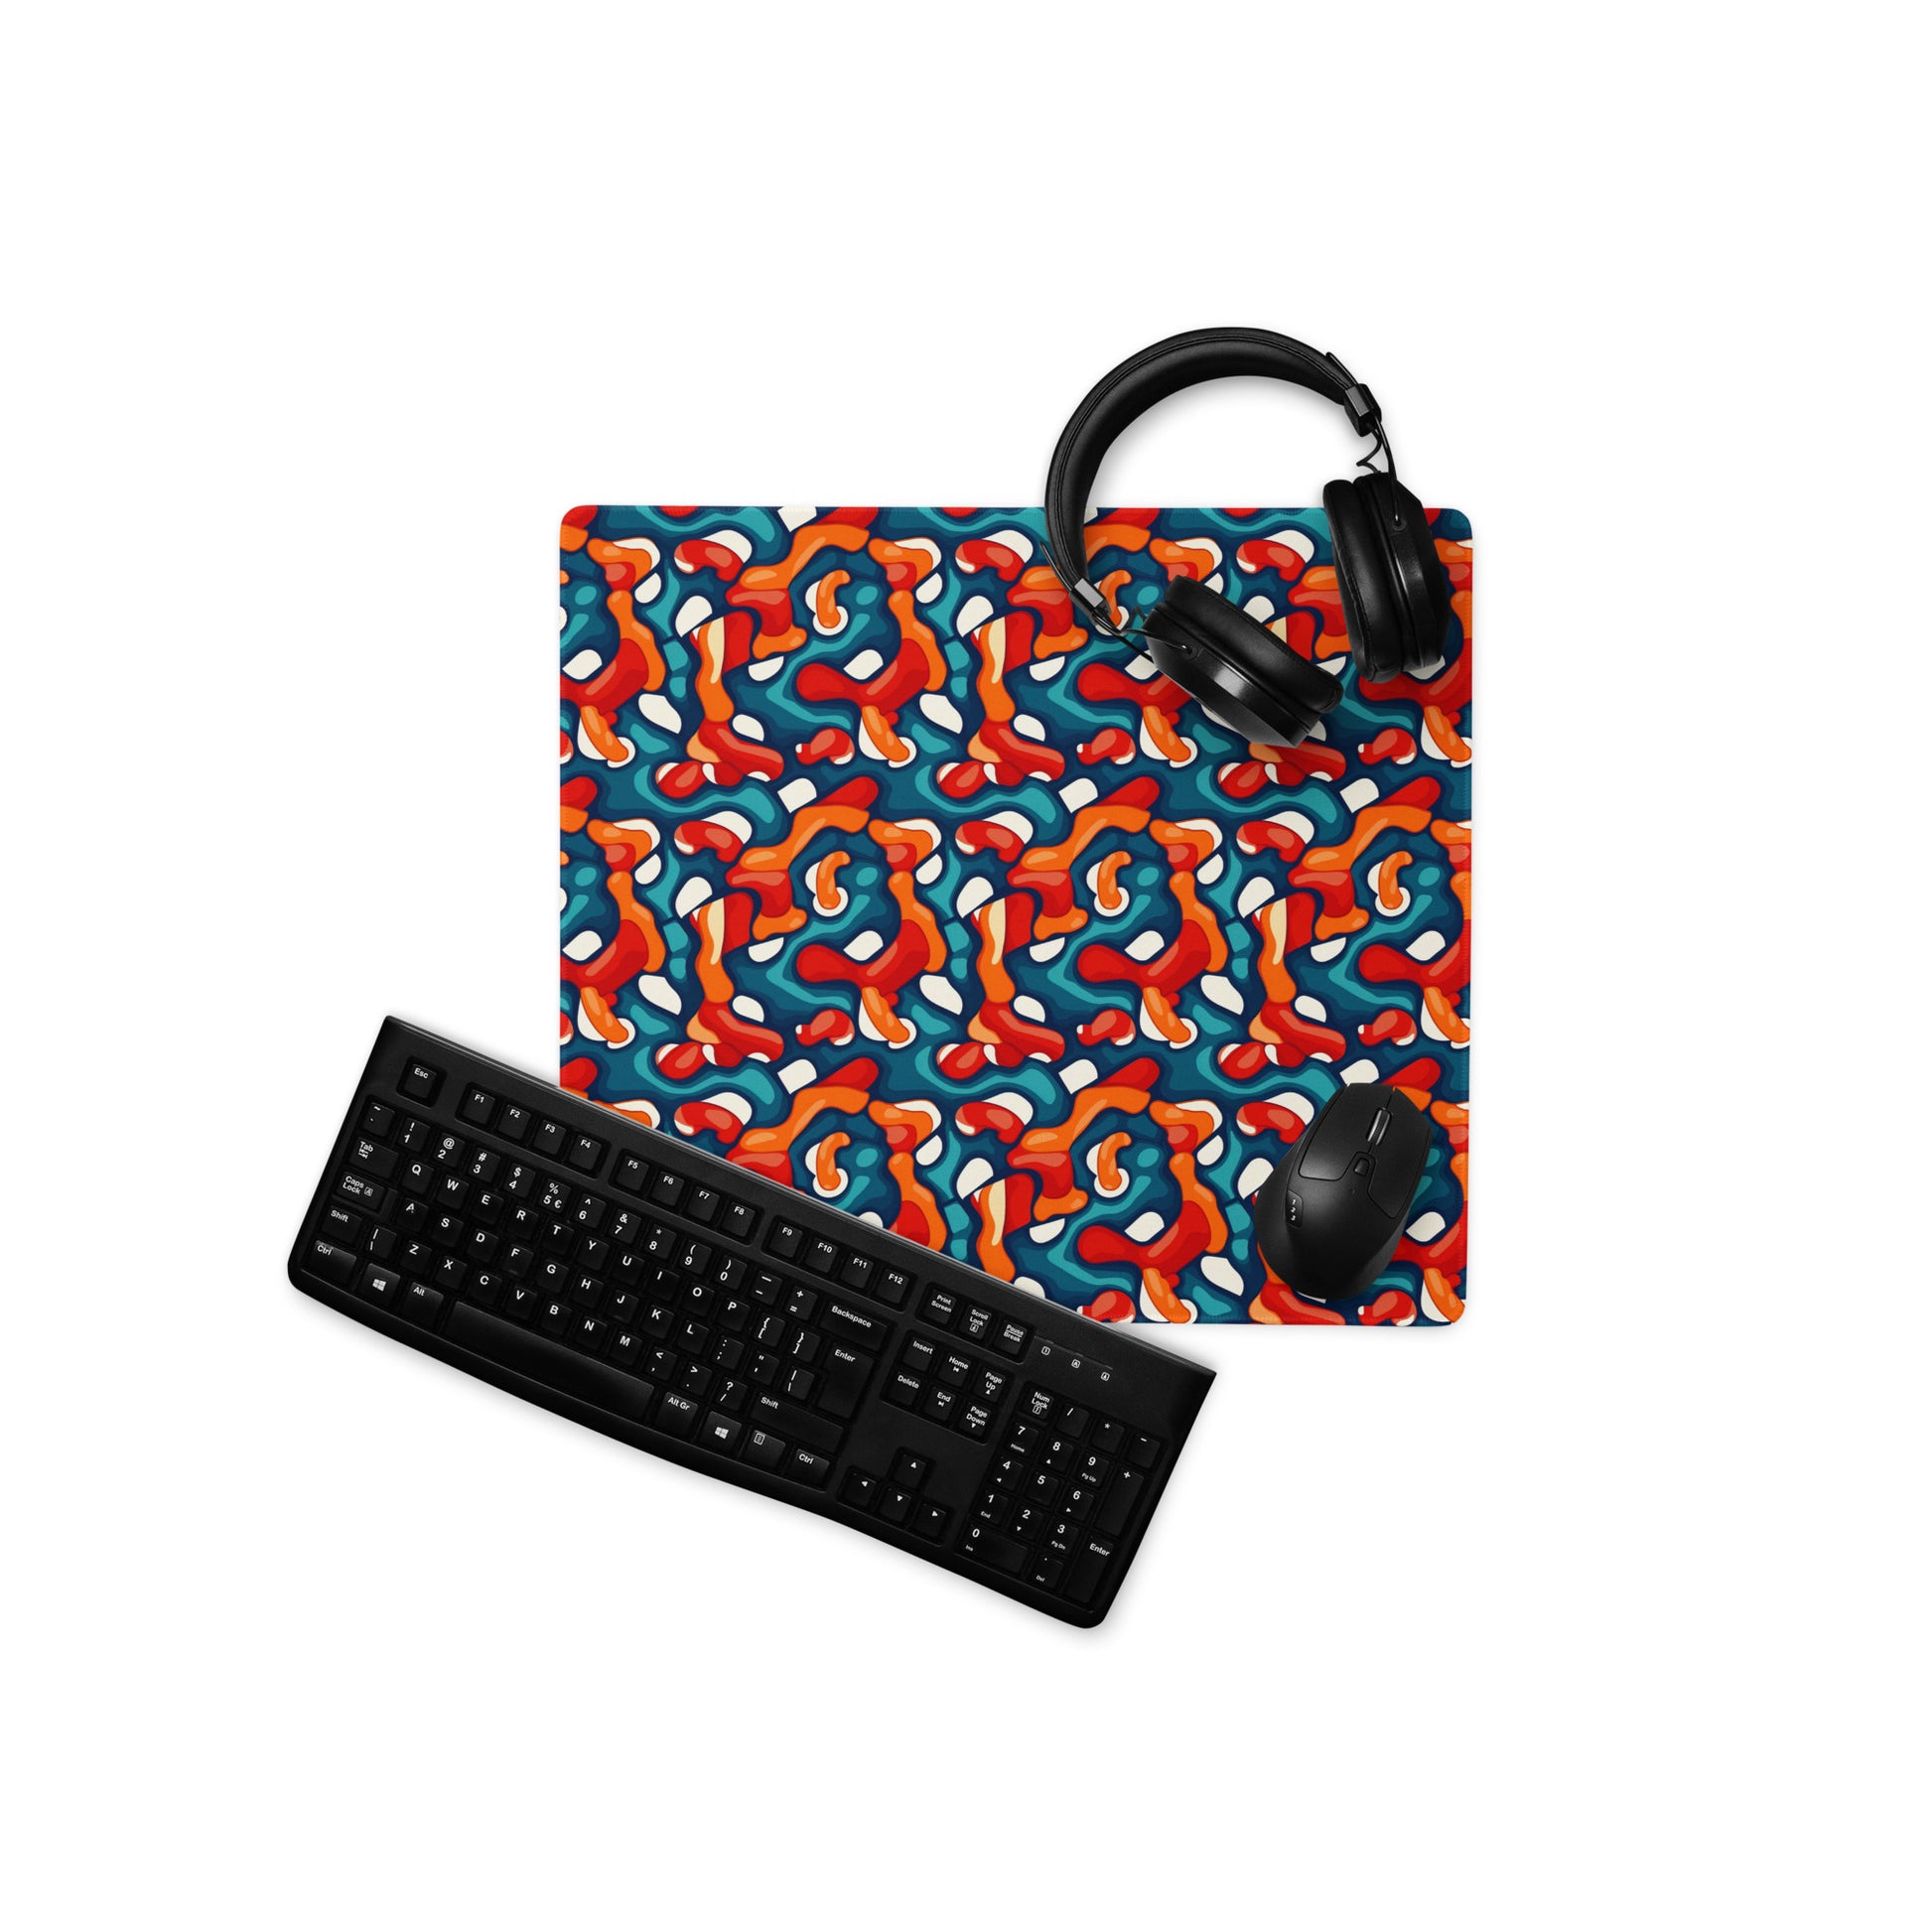 A 18" x 16" desk pad with abstract line art on it displayed with a keyboard, headphones and a mouse. Red, Teal and Orange in color.